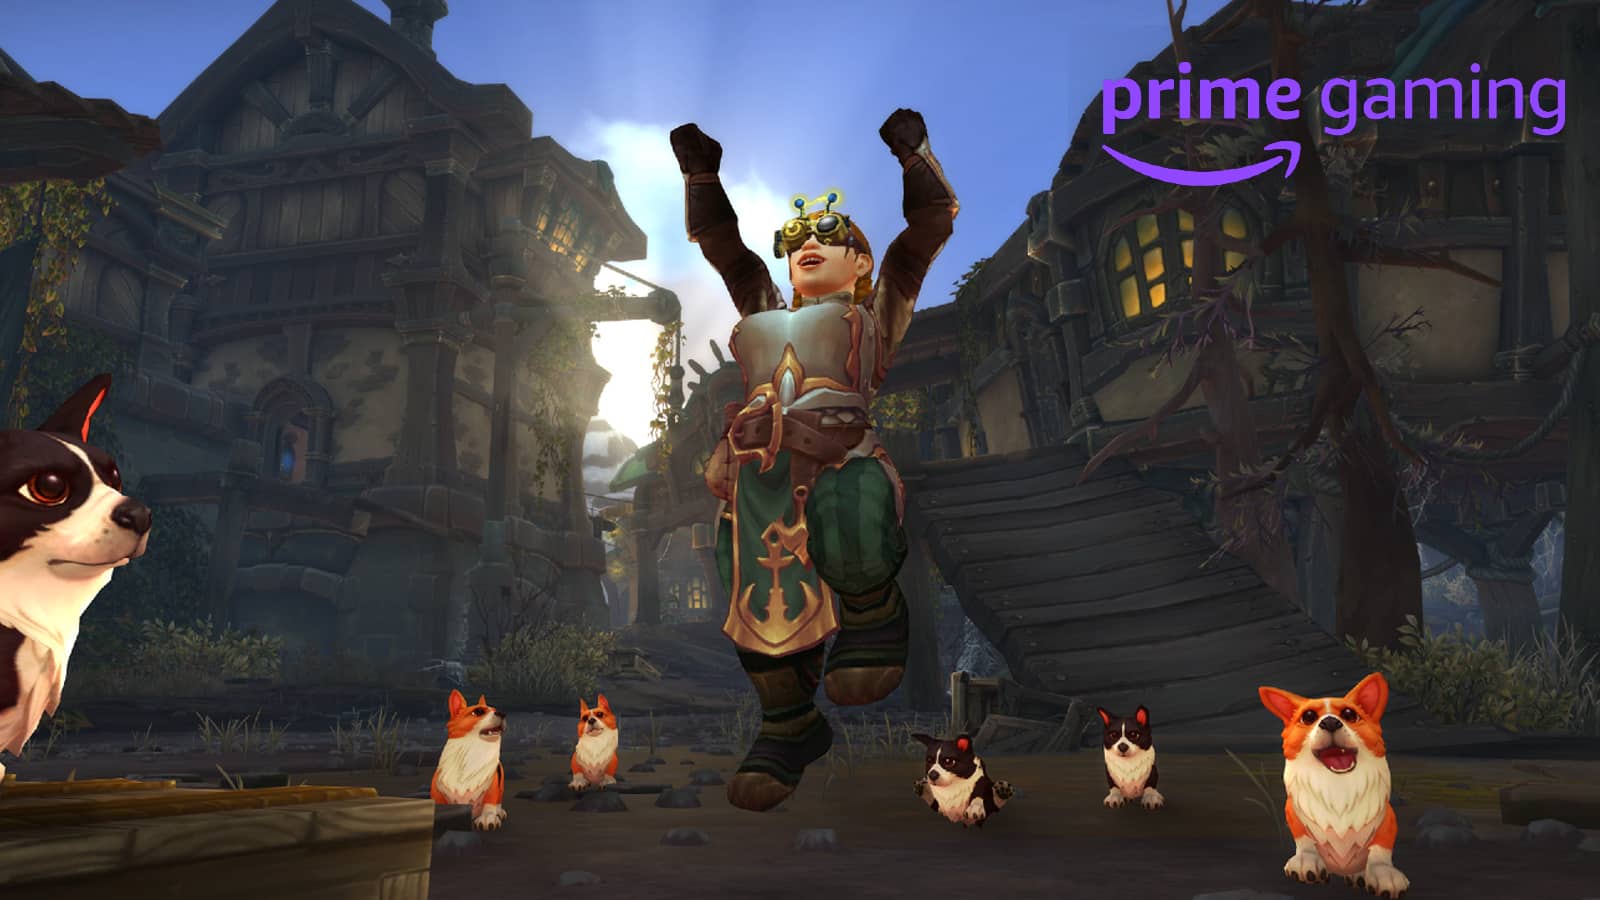 world of warcraft dwarf engineer jumps up and down surrounded by corgis